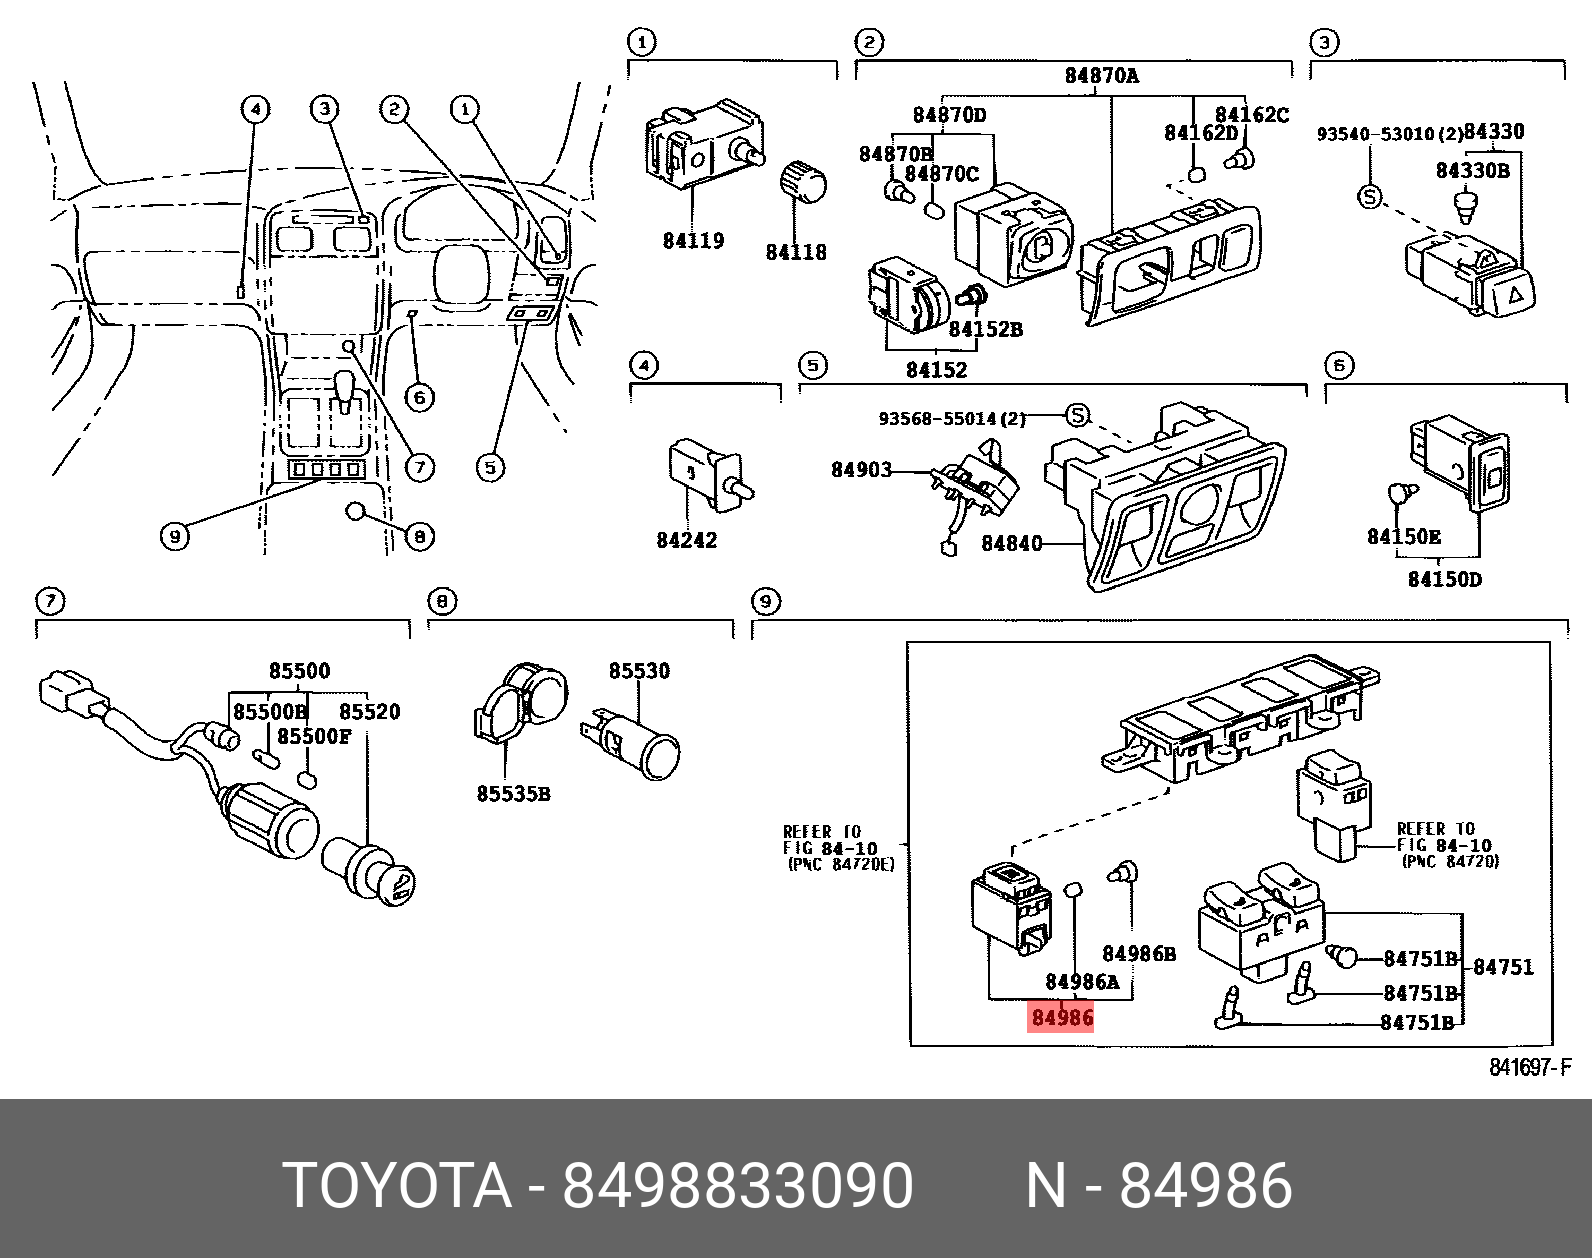 CAMRY HYBRID 201108 - 201704, SWITCH, VEHICLE STABILITY CONTROL